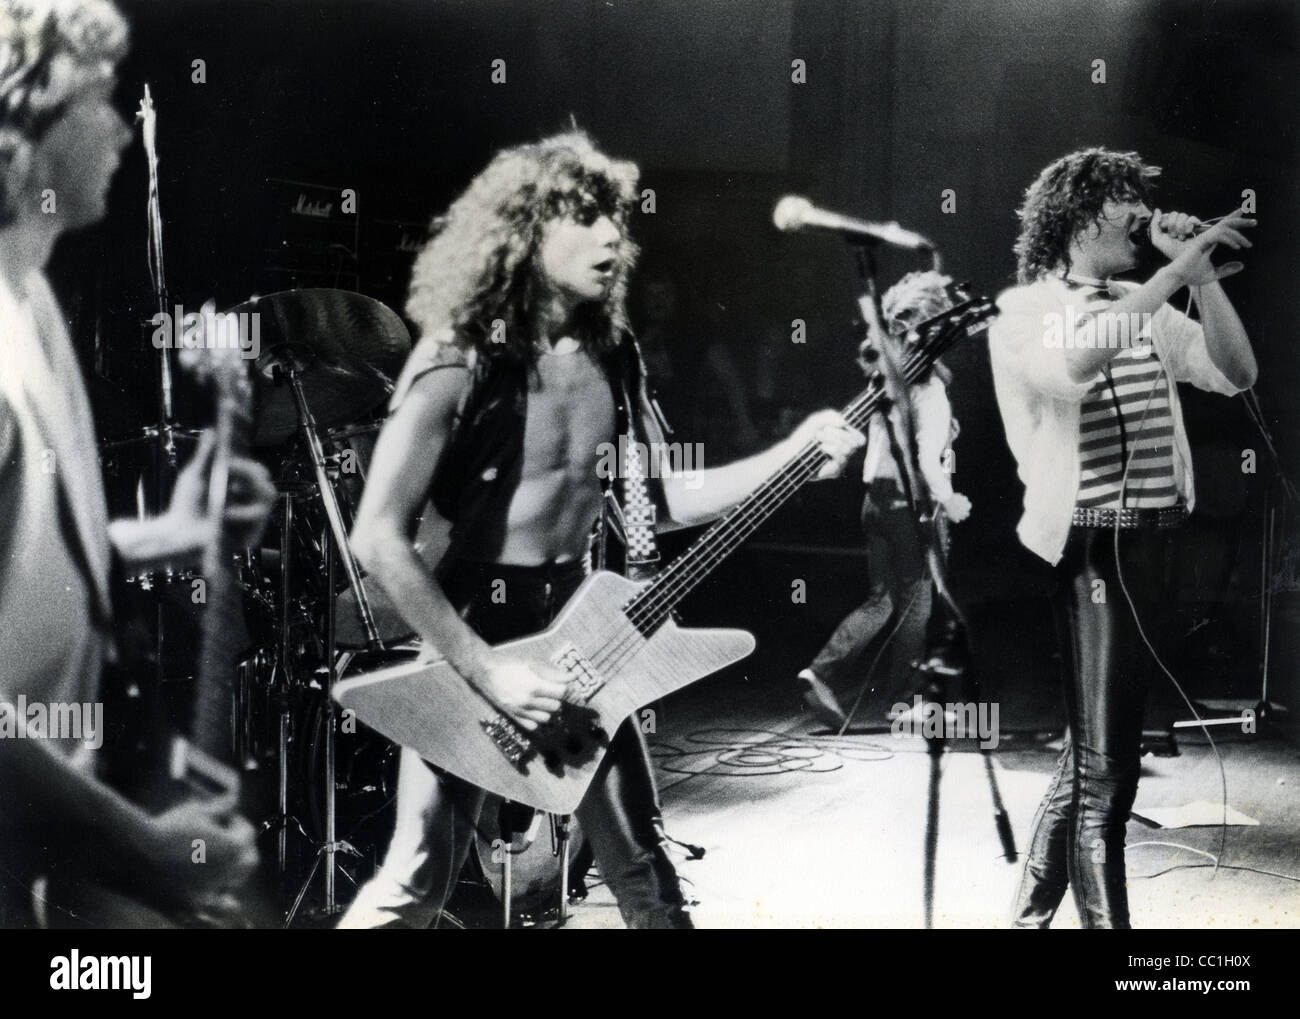 DEF LEPPARD UK rock group in 1980 with Pete Willis centre and Joe Elliot at  right. Photo: Laurens van Houten Stock Photo - Alamy